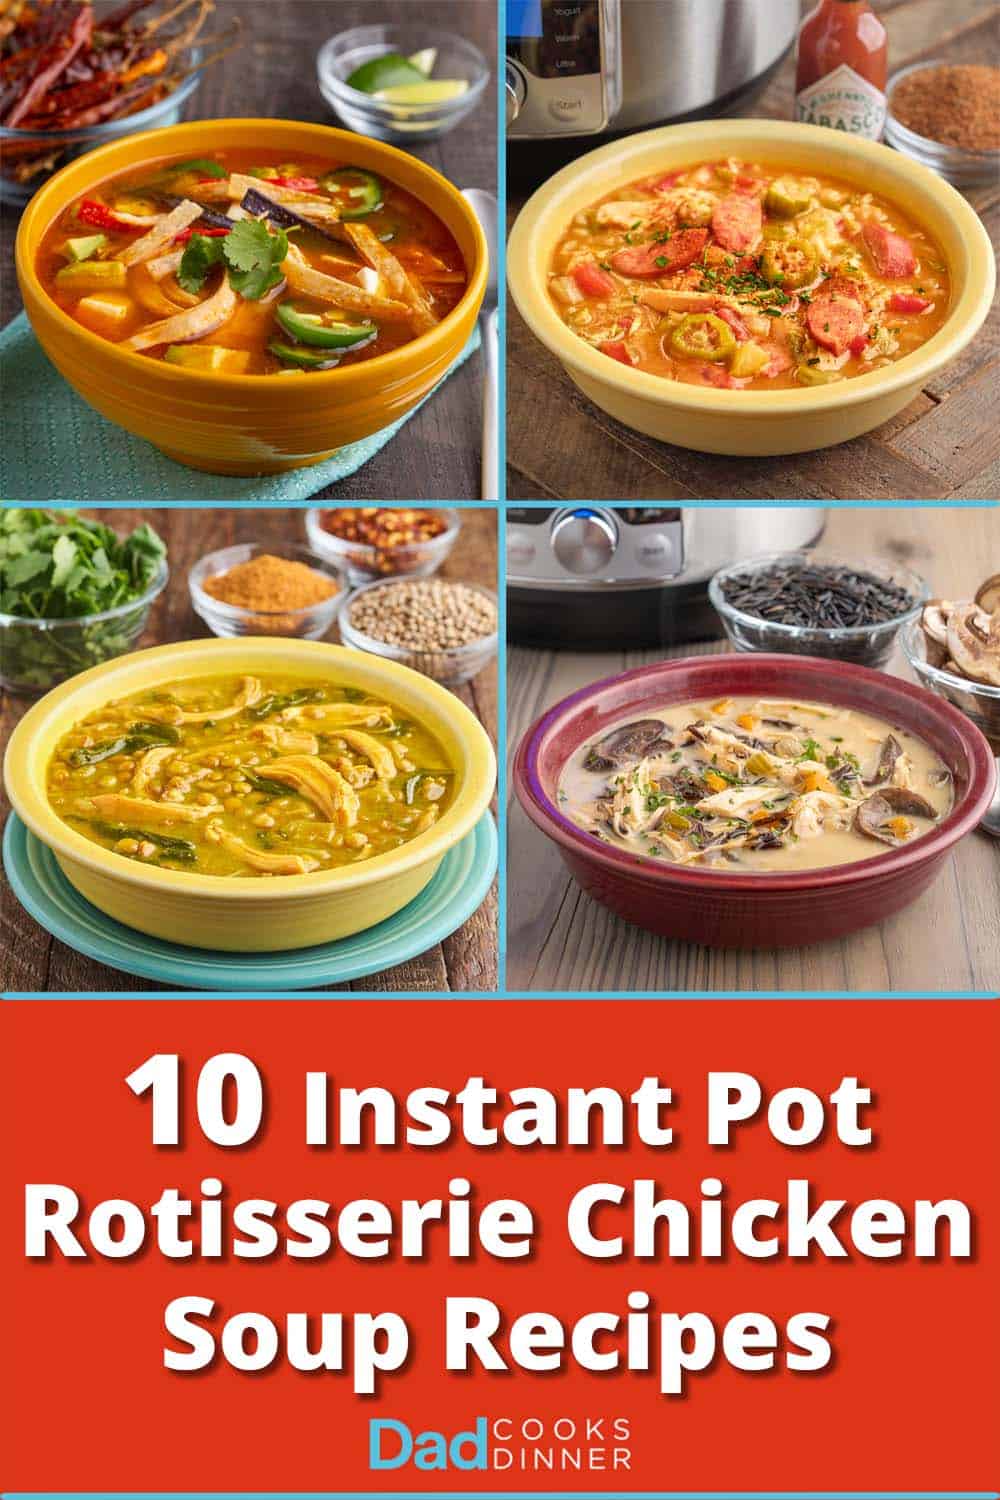 A collage of four different chicken soup bowls with tortilla soup, gumbo, lentil, and wild rice soup, with text saying 10 instant pot rotisserie chicken soup recipes